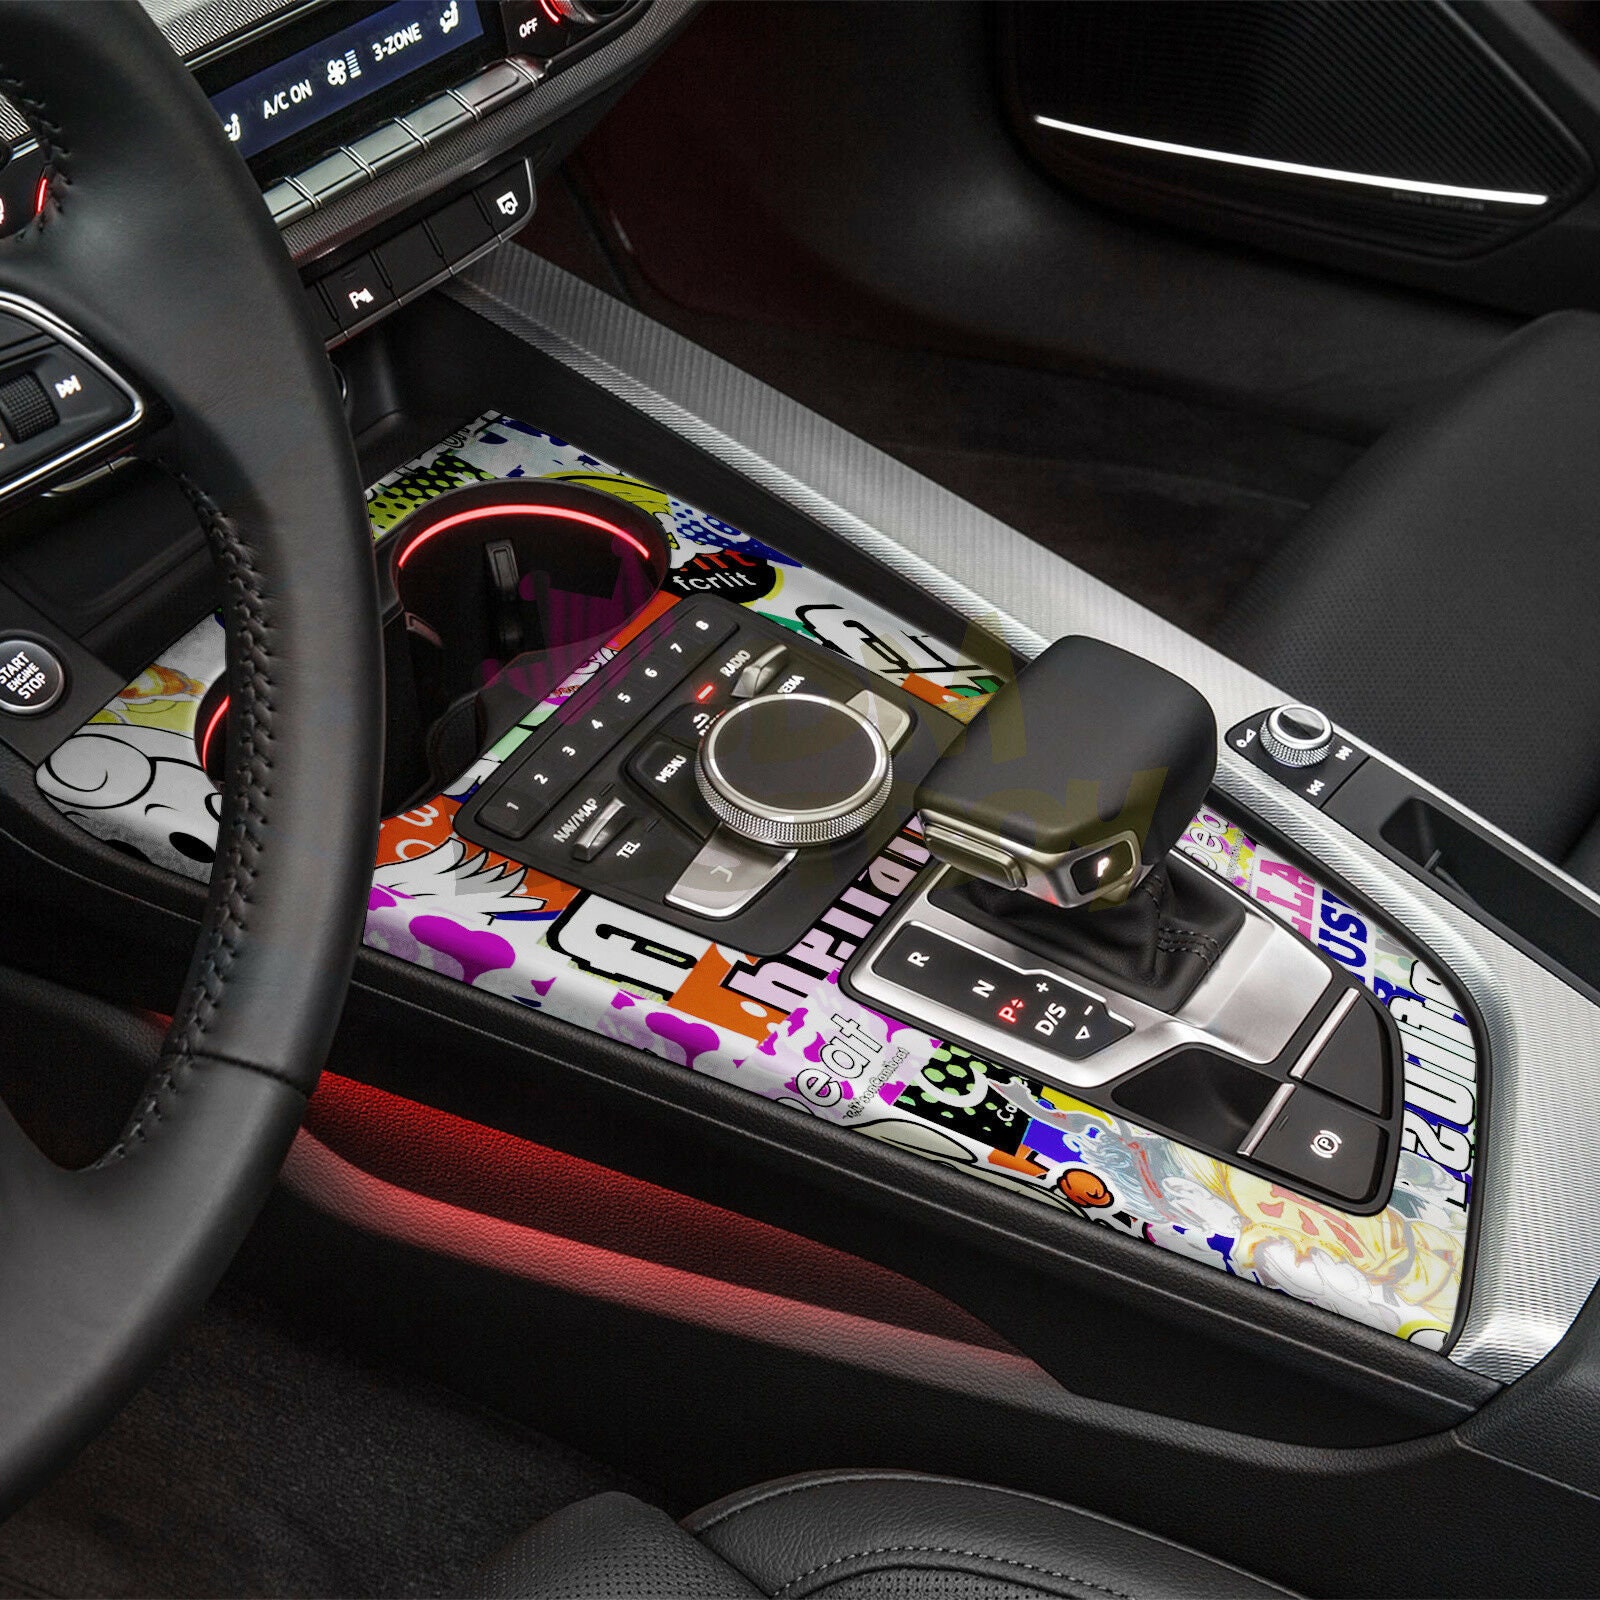 Interieur #Innenraum #Auto #car #vehiclewrapping #stickerbomb